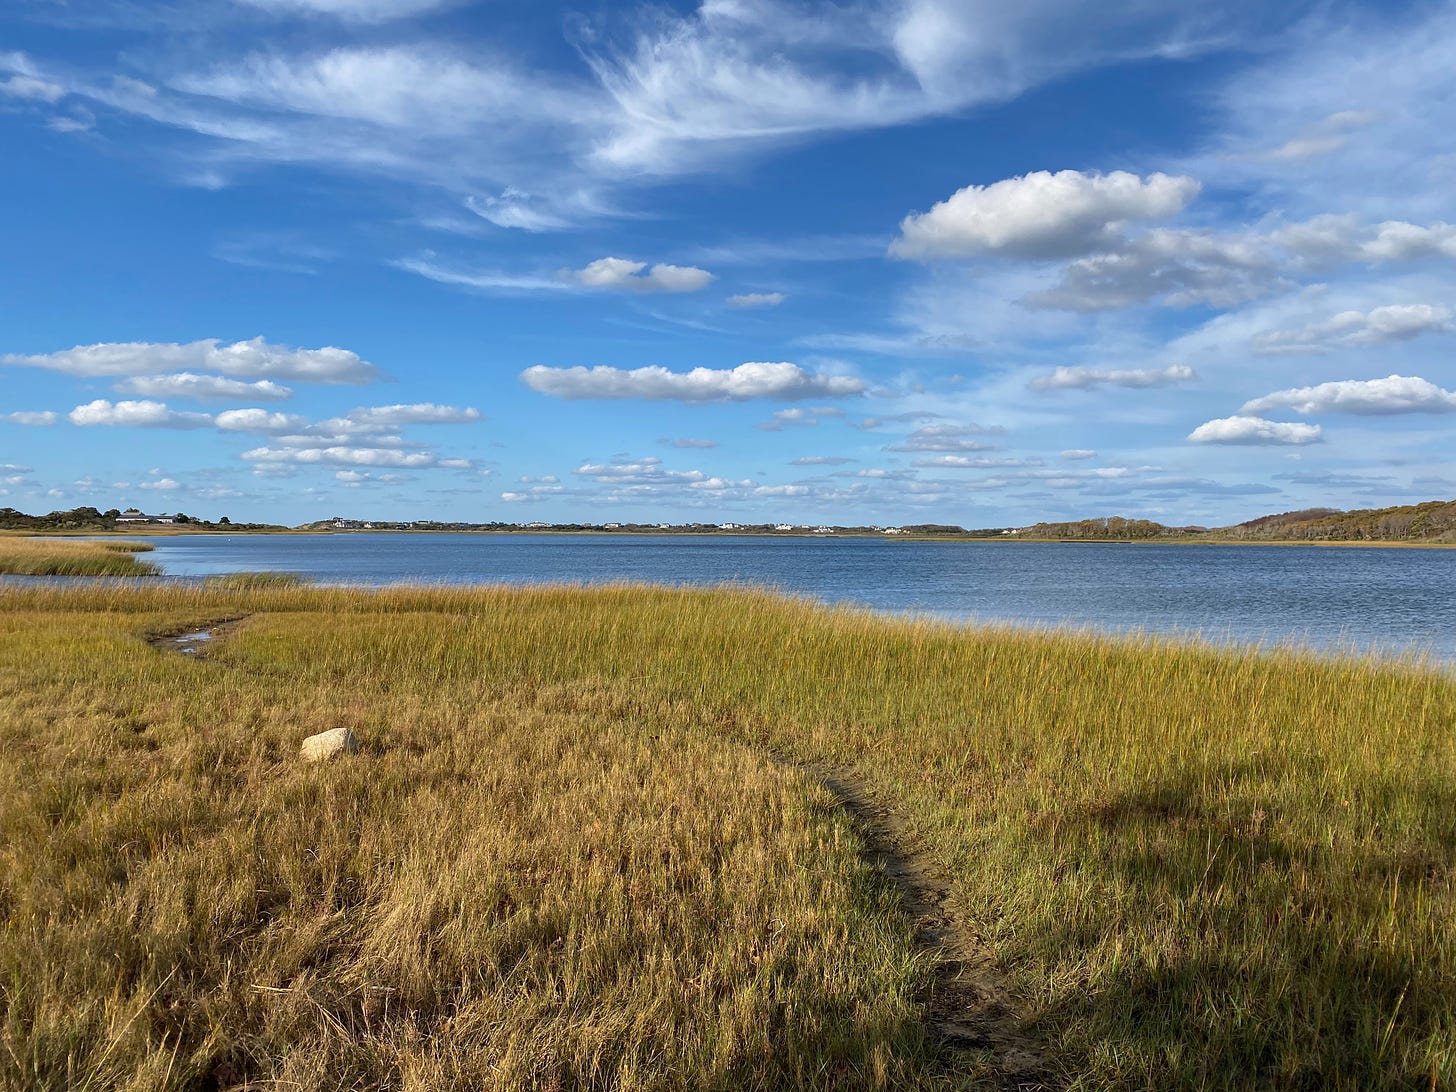 View of a bright green salt marsh under a blue sky dotted with clouds.